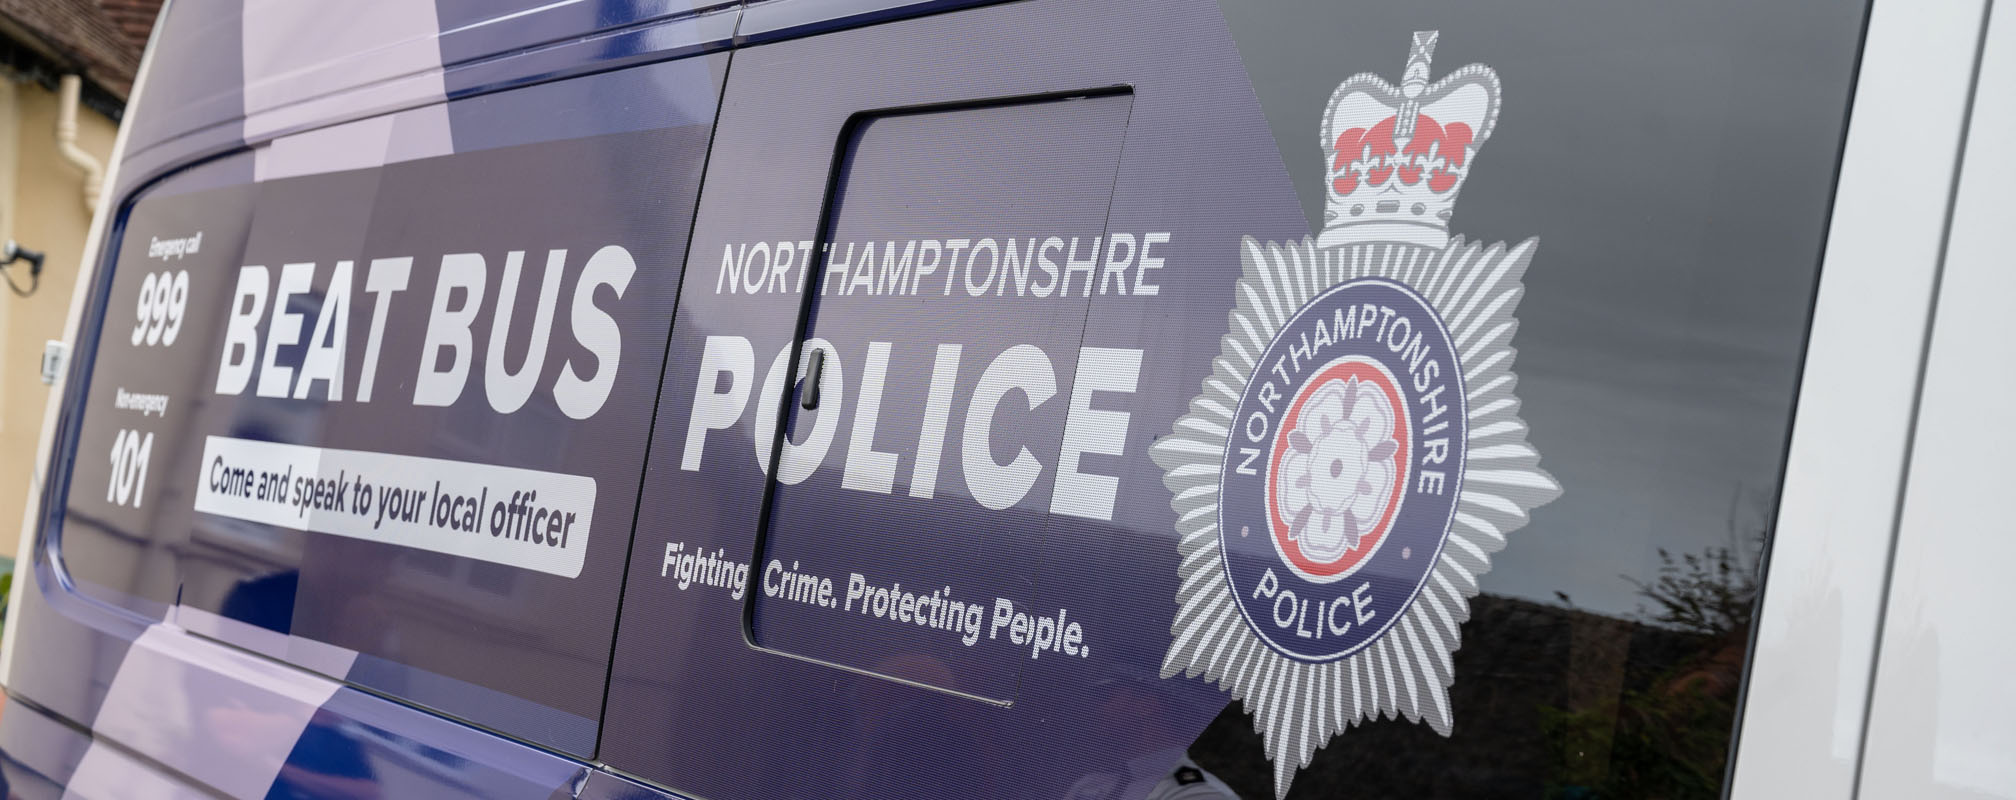 Picture of Northamptonshire Police's Beat Bus